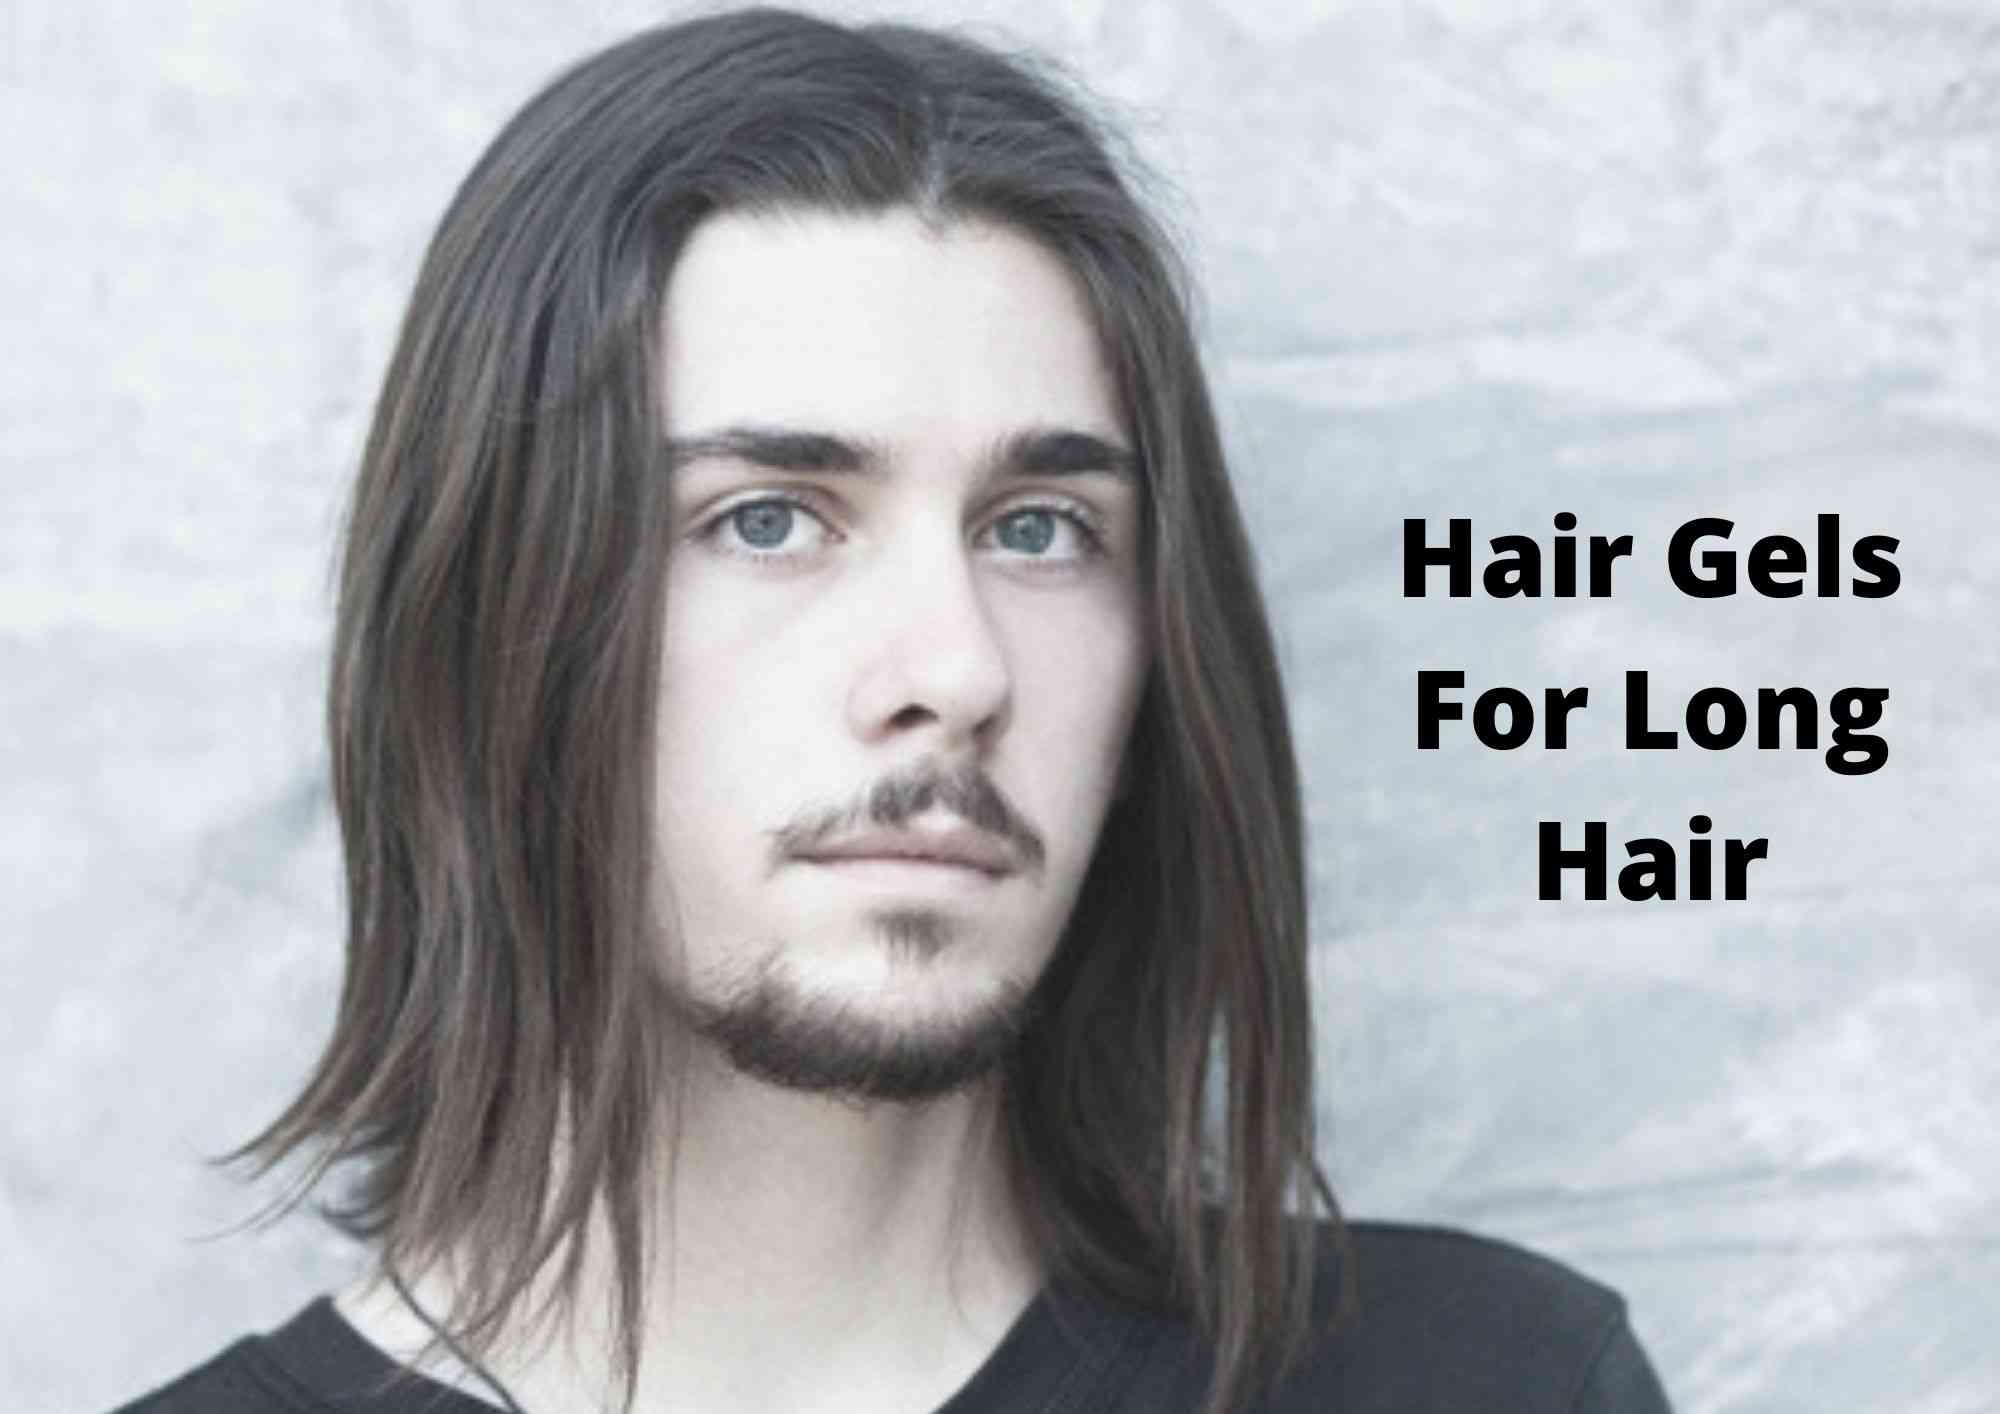 8 Best Hair Gels For Long Hair 2023 | Styling Products For Men With Long,  Thick Hair - Hair Everyday Review